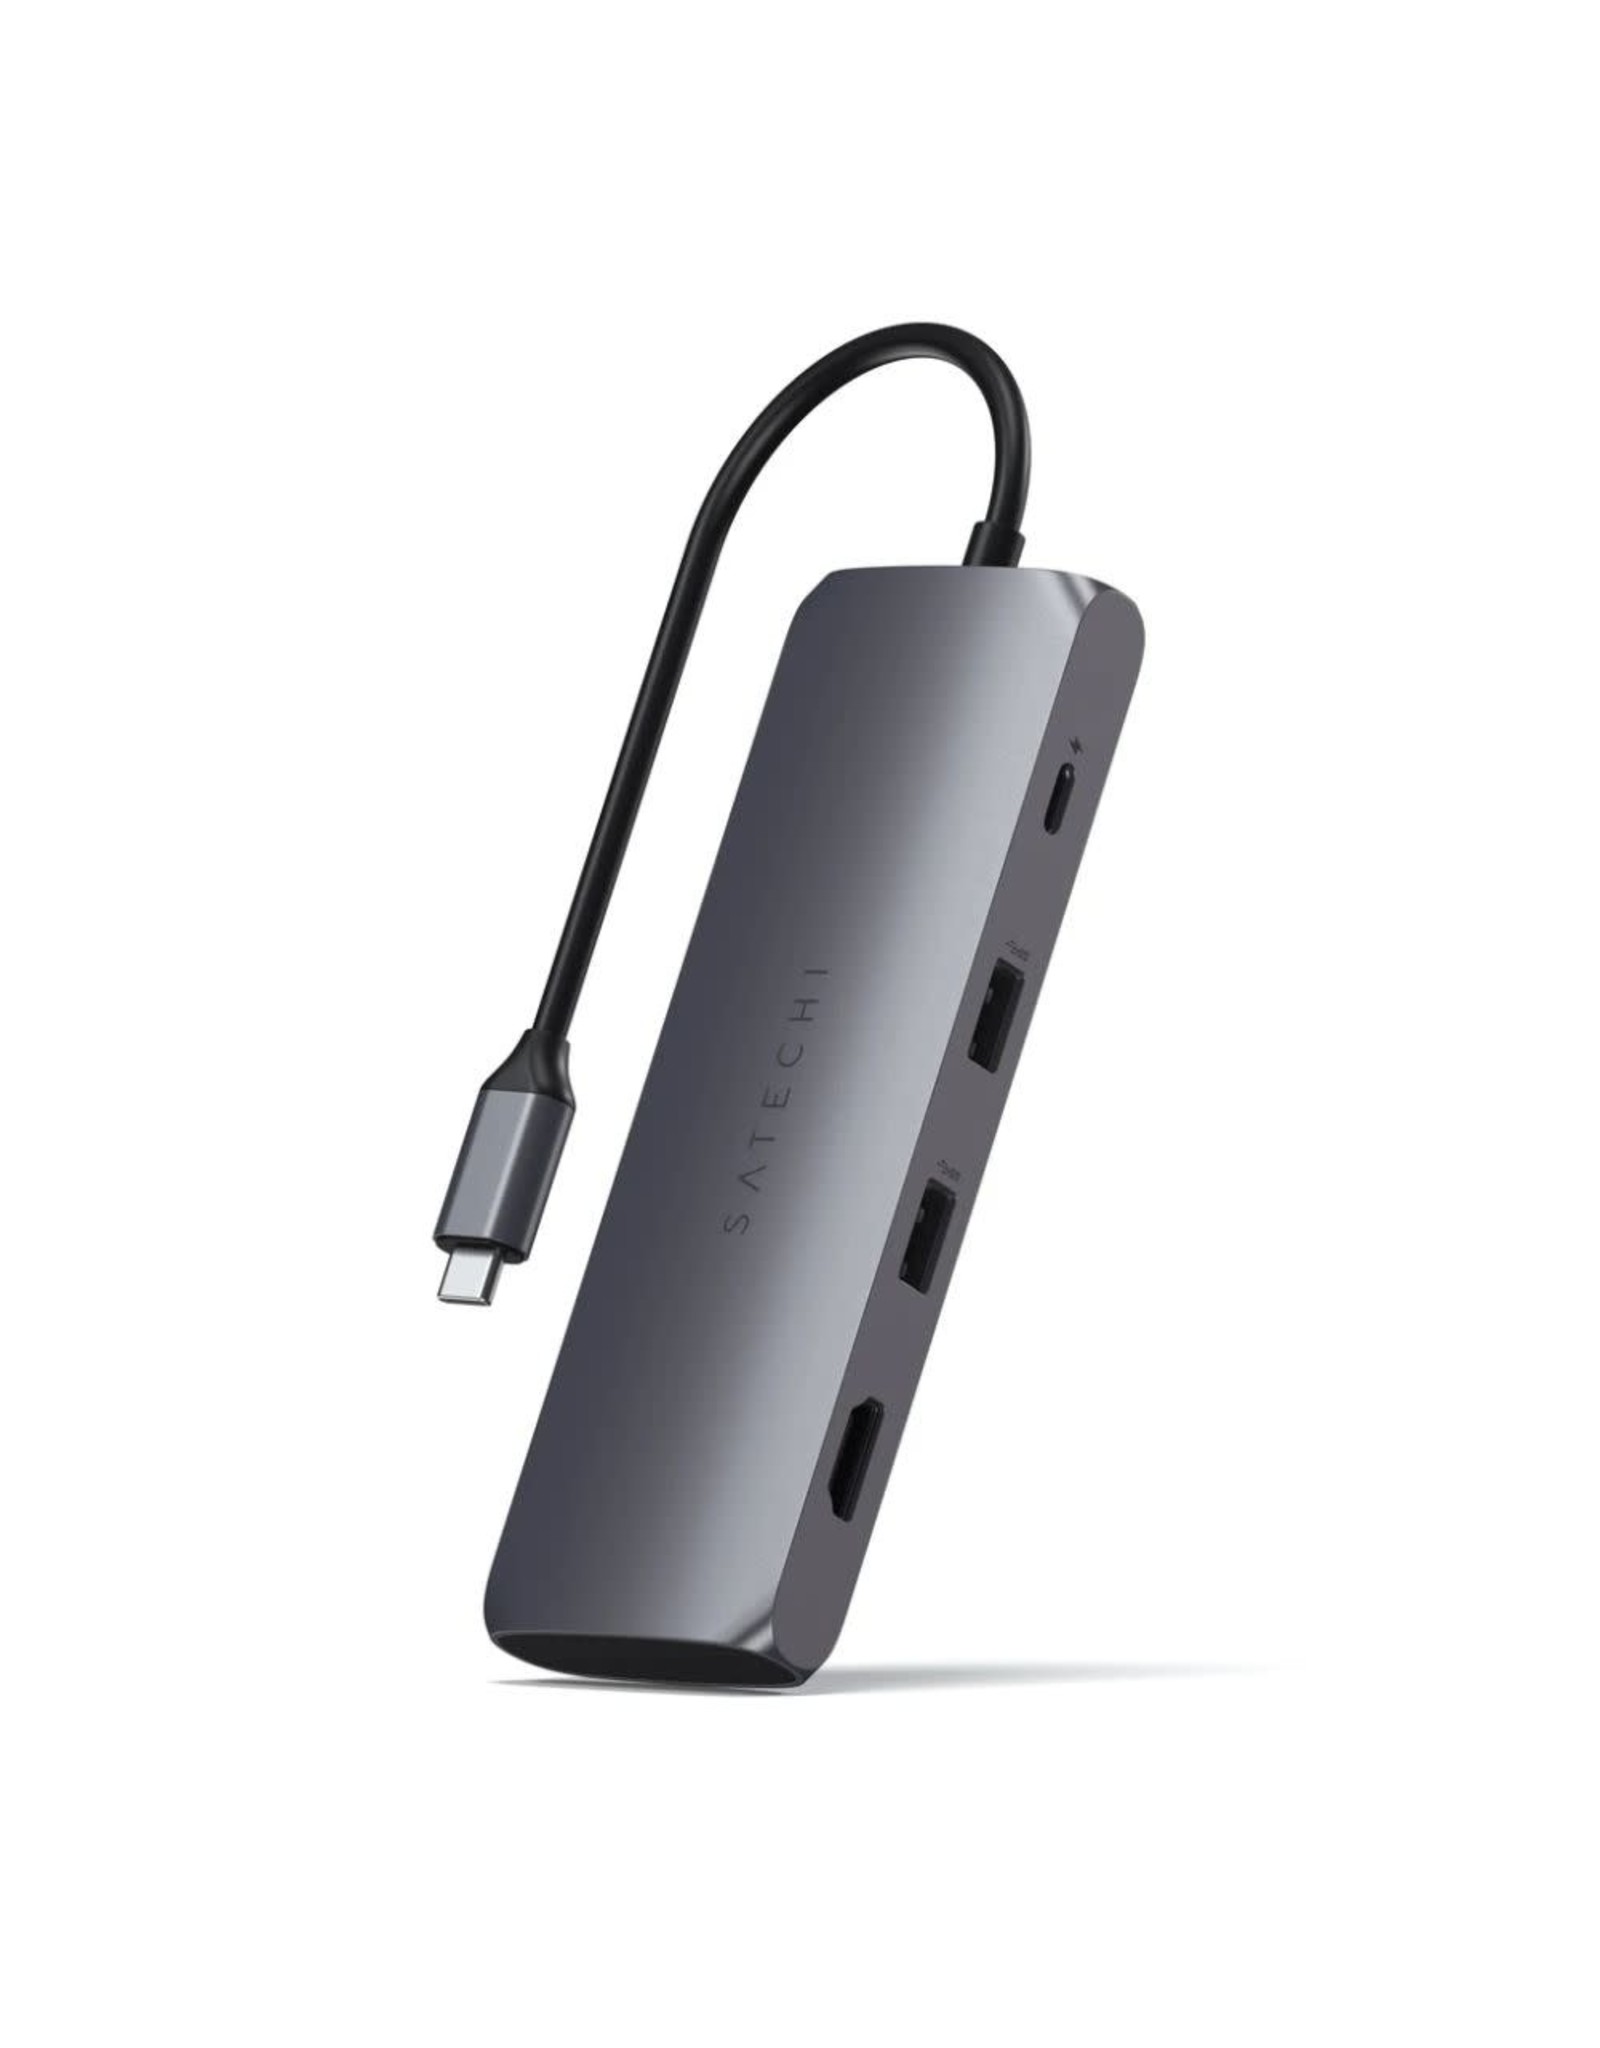 Satechi Satechi USB-C Hybrid Multiport Adapter with SSD Enclosure - Space Grey - fits SATA M.2 SSD (not included)